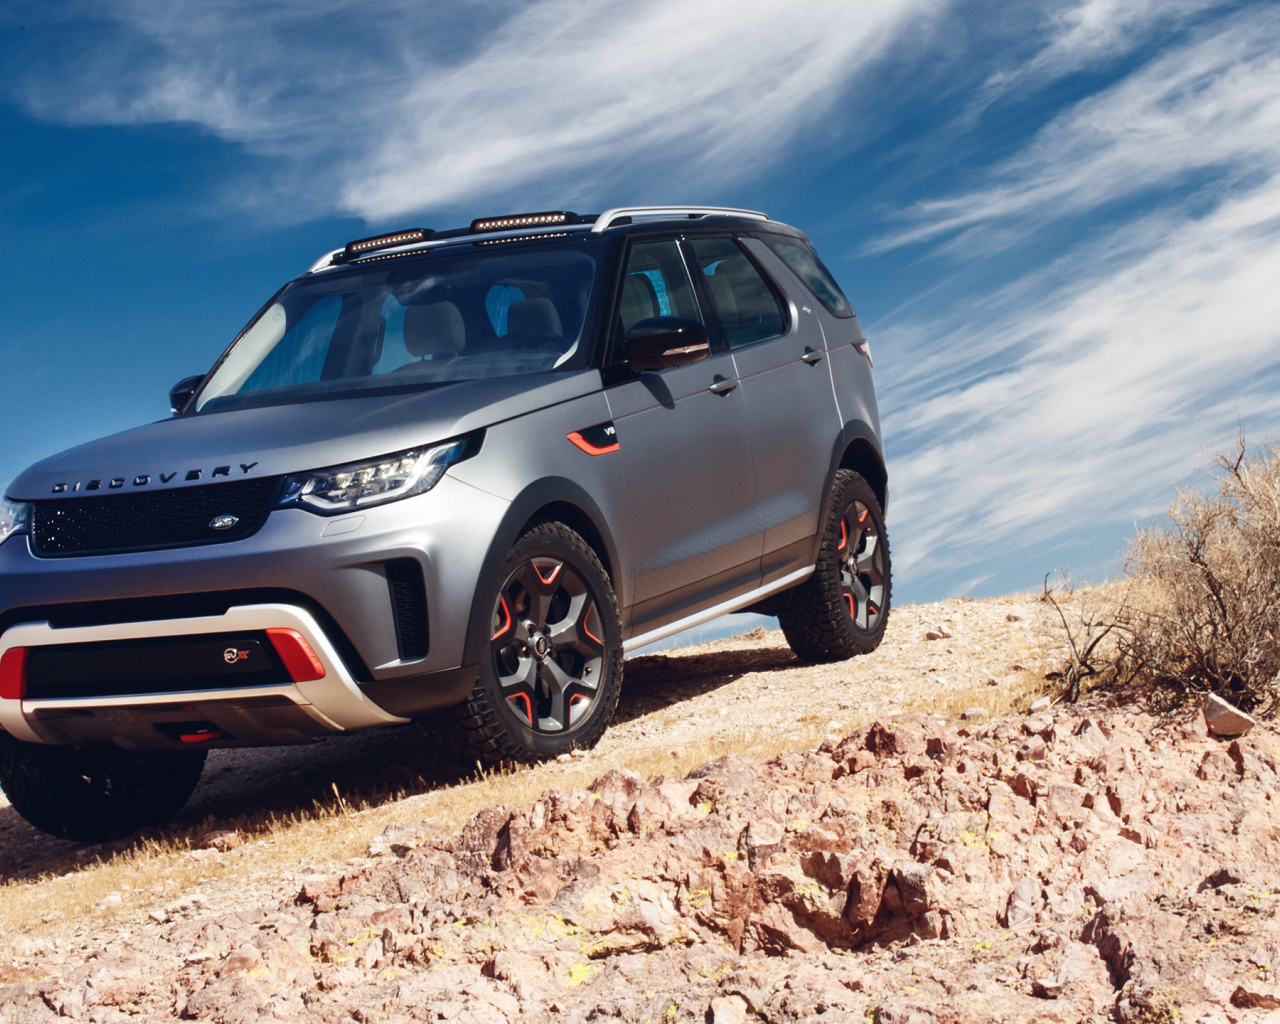 Silver SUV Land Rover Discovery SVX 2, 2018 against the sky